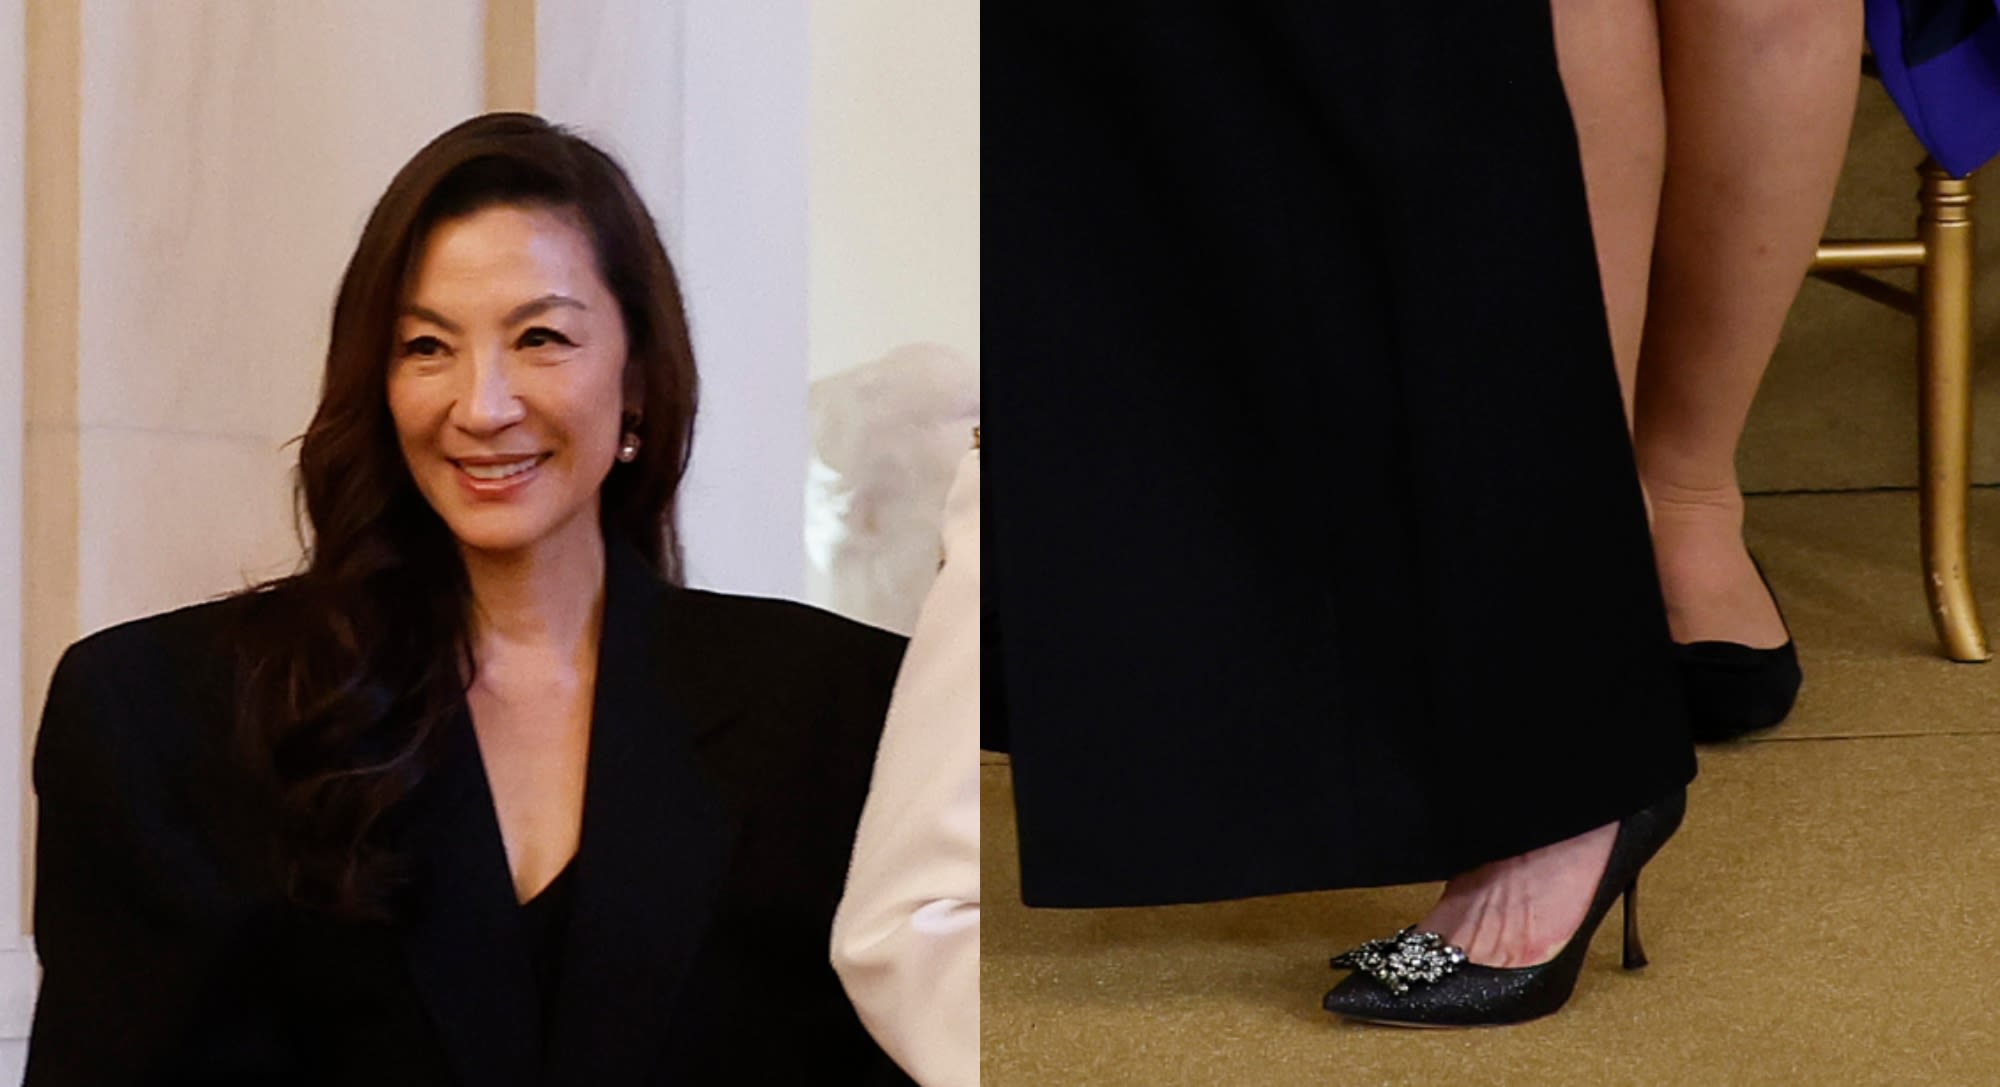 Michelle Yeoh Ups the Glitz in Roger Vivier Crystal Embellished Pumps at White House Presidential Medal of Freedom Ceremony